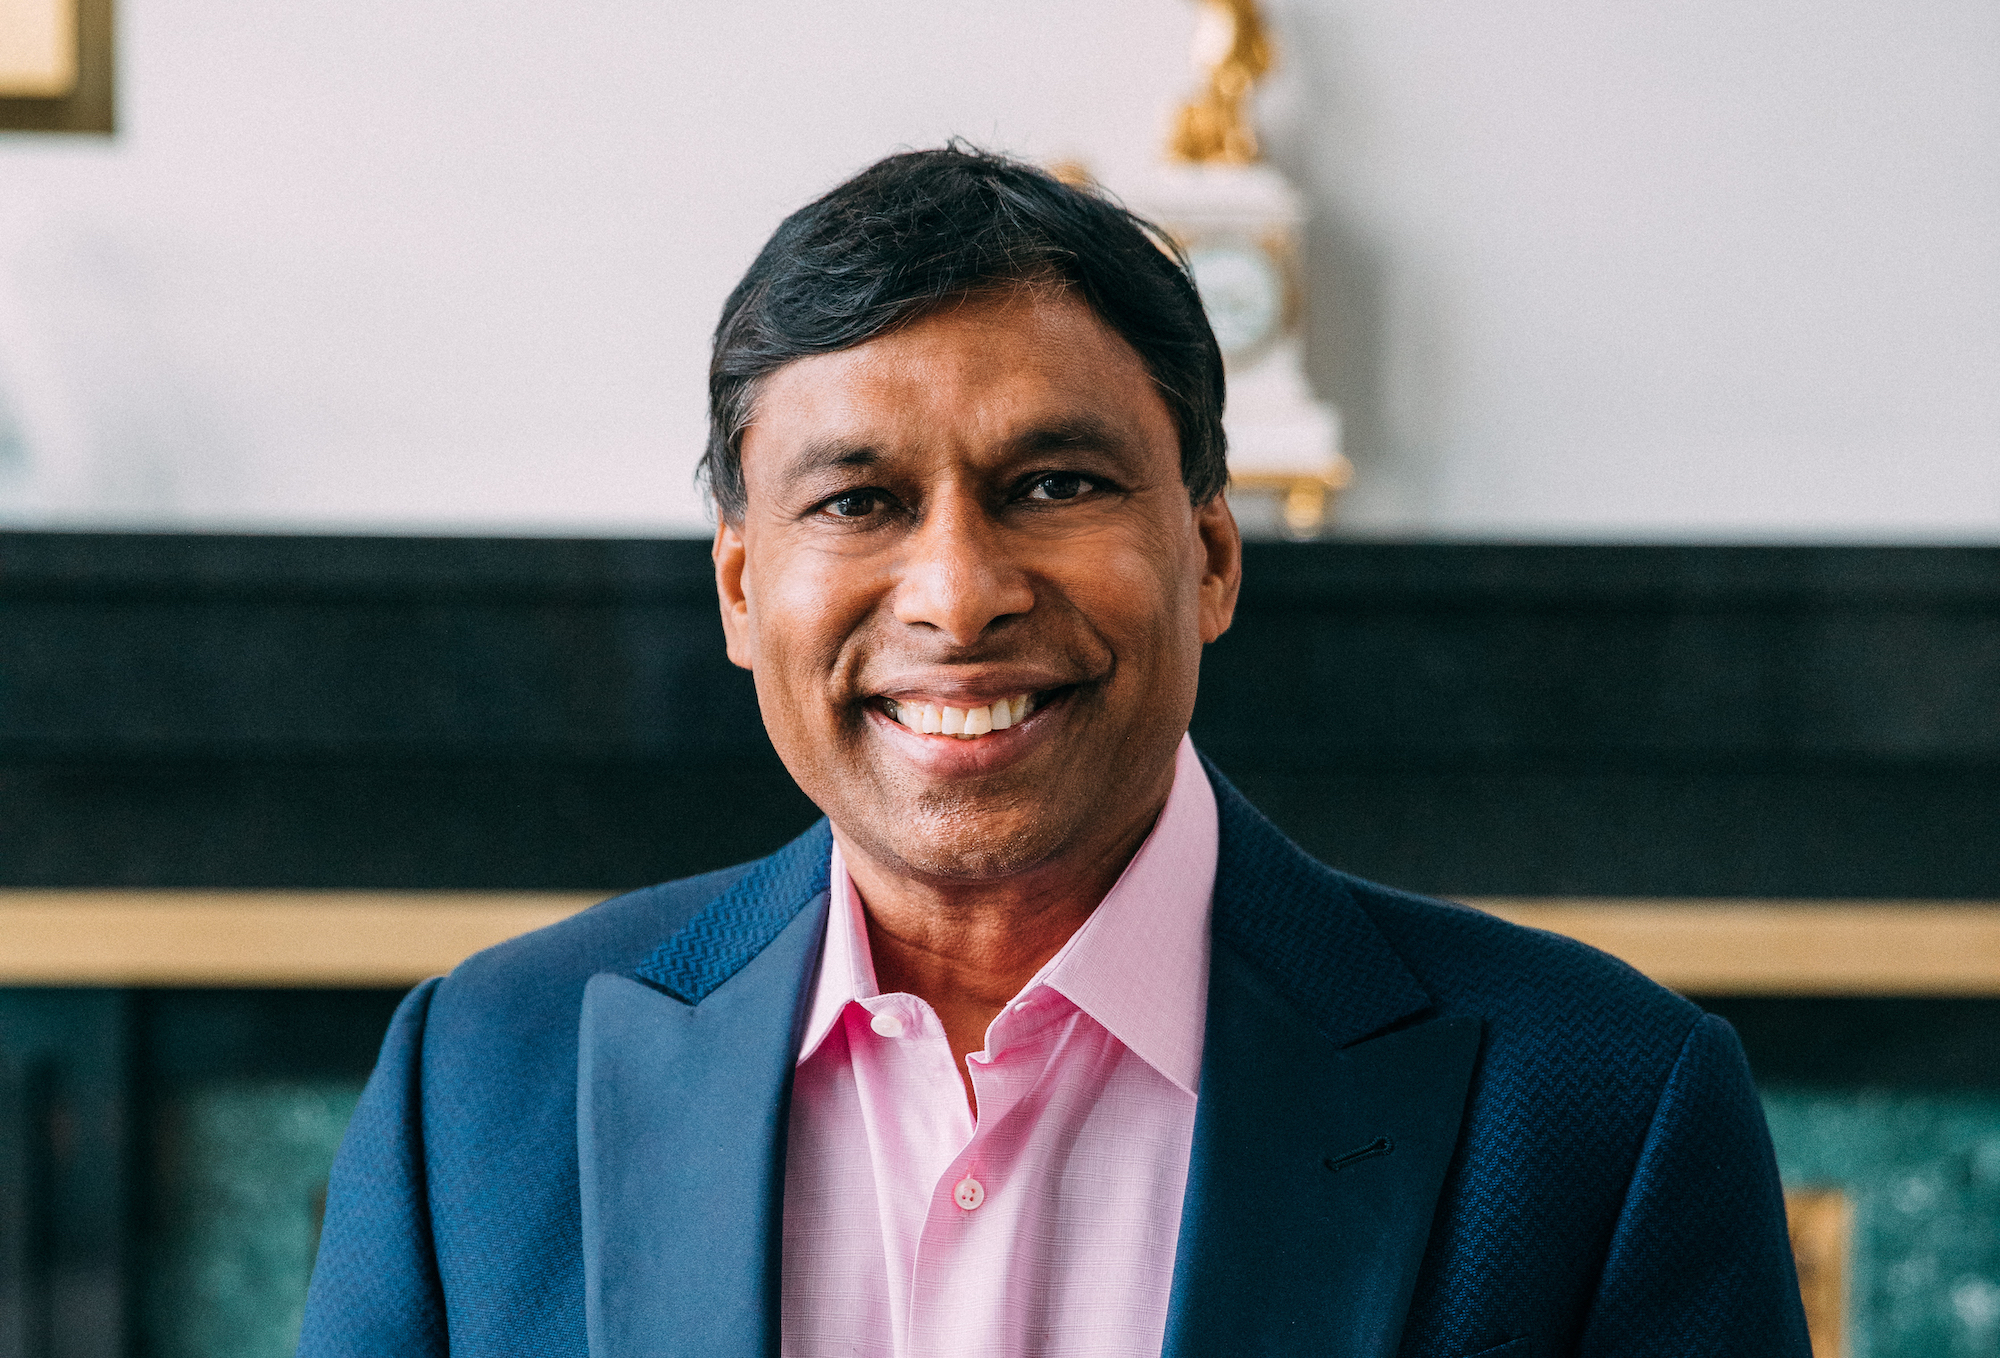 Naveen Jain, CEO and founder of Viome, poses for a photo